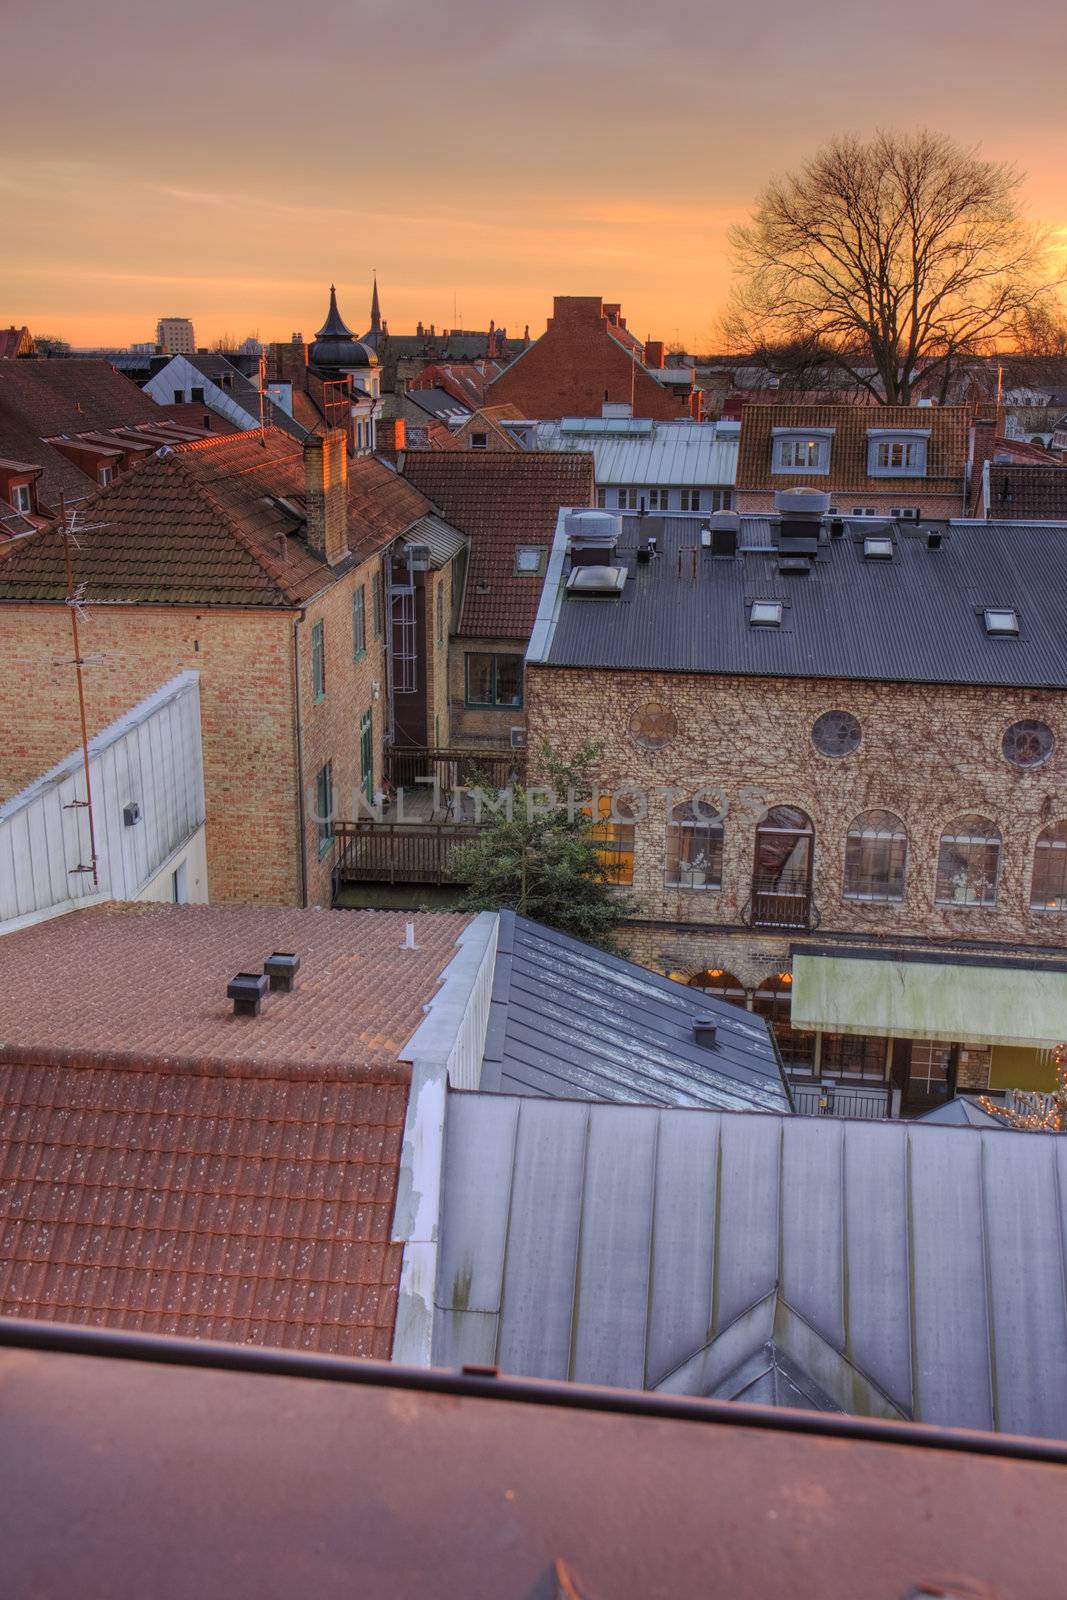 View of the roofs ot Lund, Sweden, at sunset